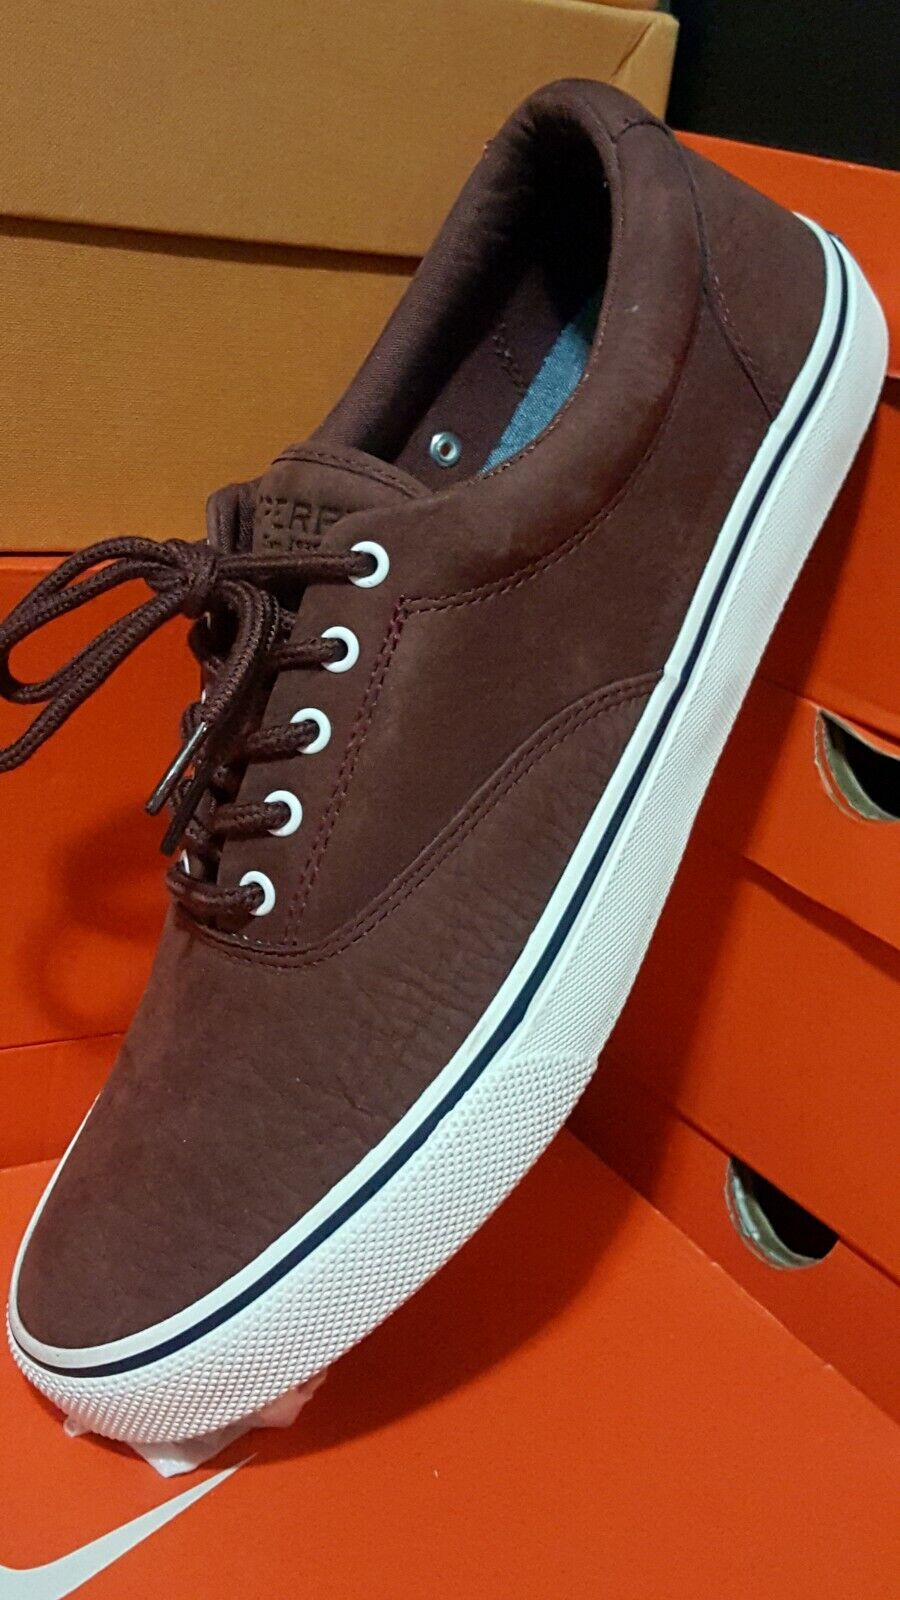 $160 NEW Sperry Top Sider LEATHER Sz BOAT LI SHOES Omaha Mall 10.5 COMFORT Cheap sale